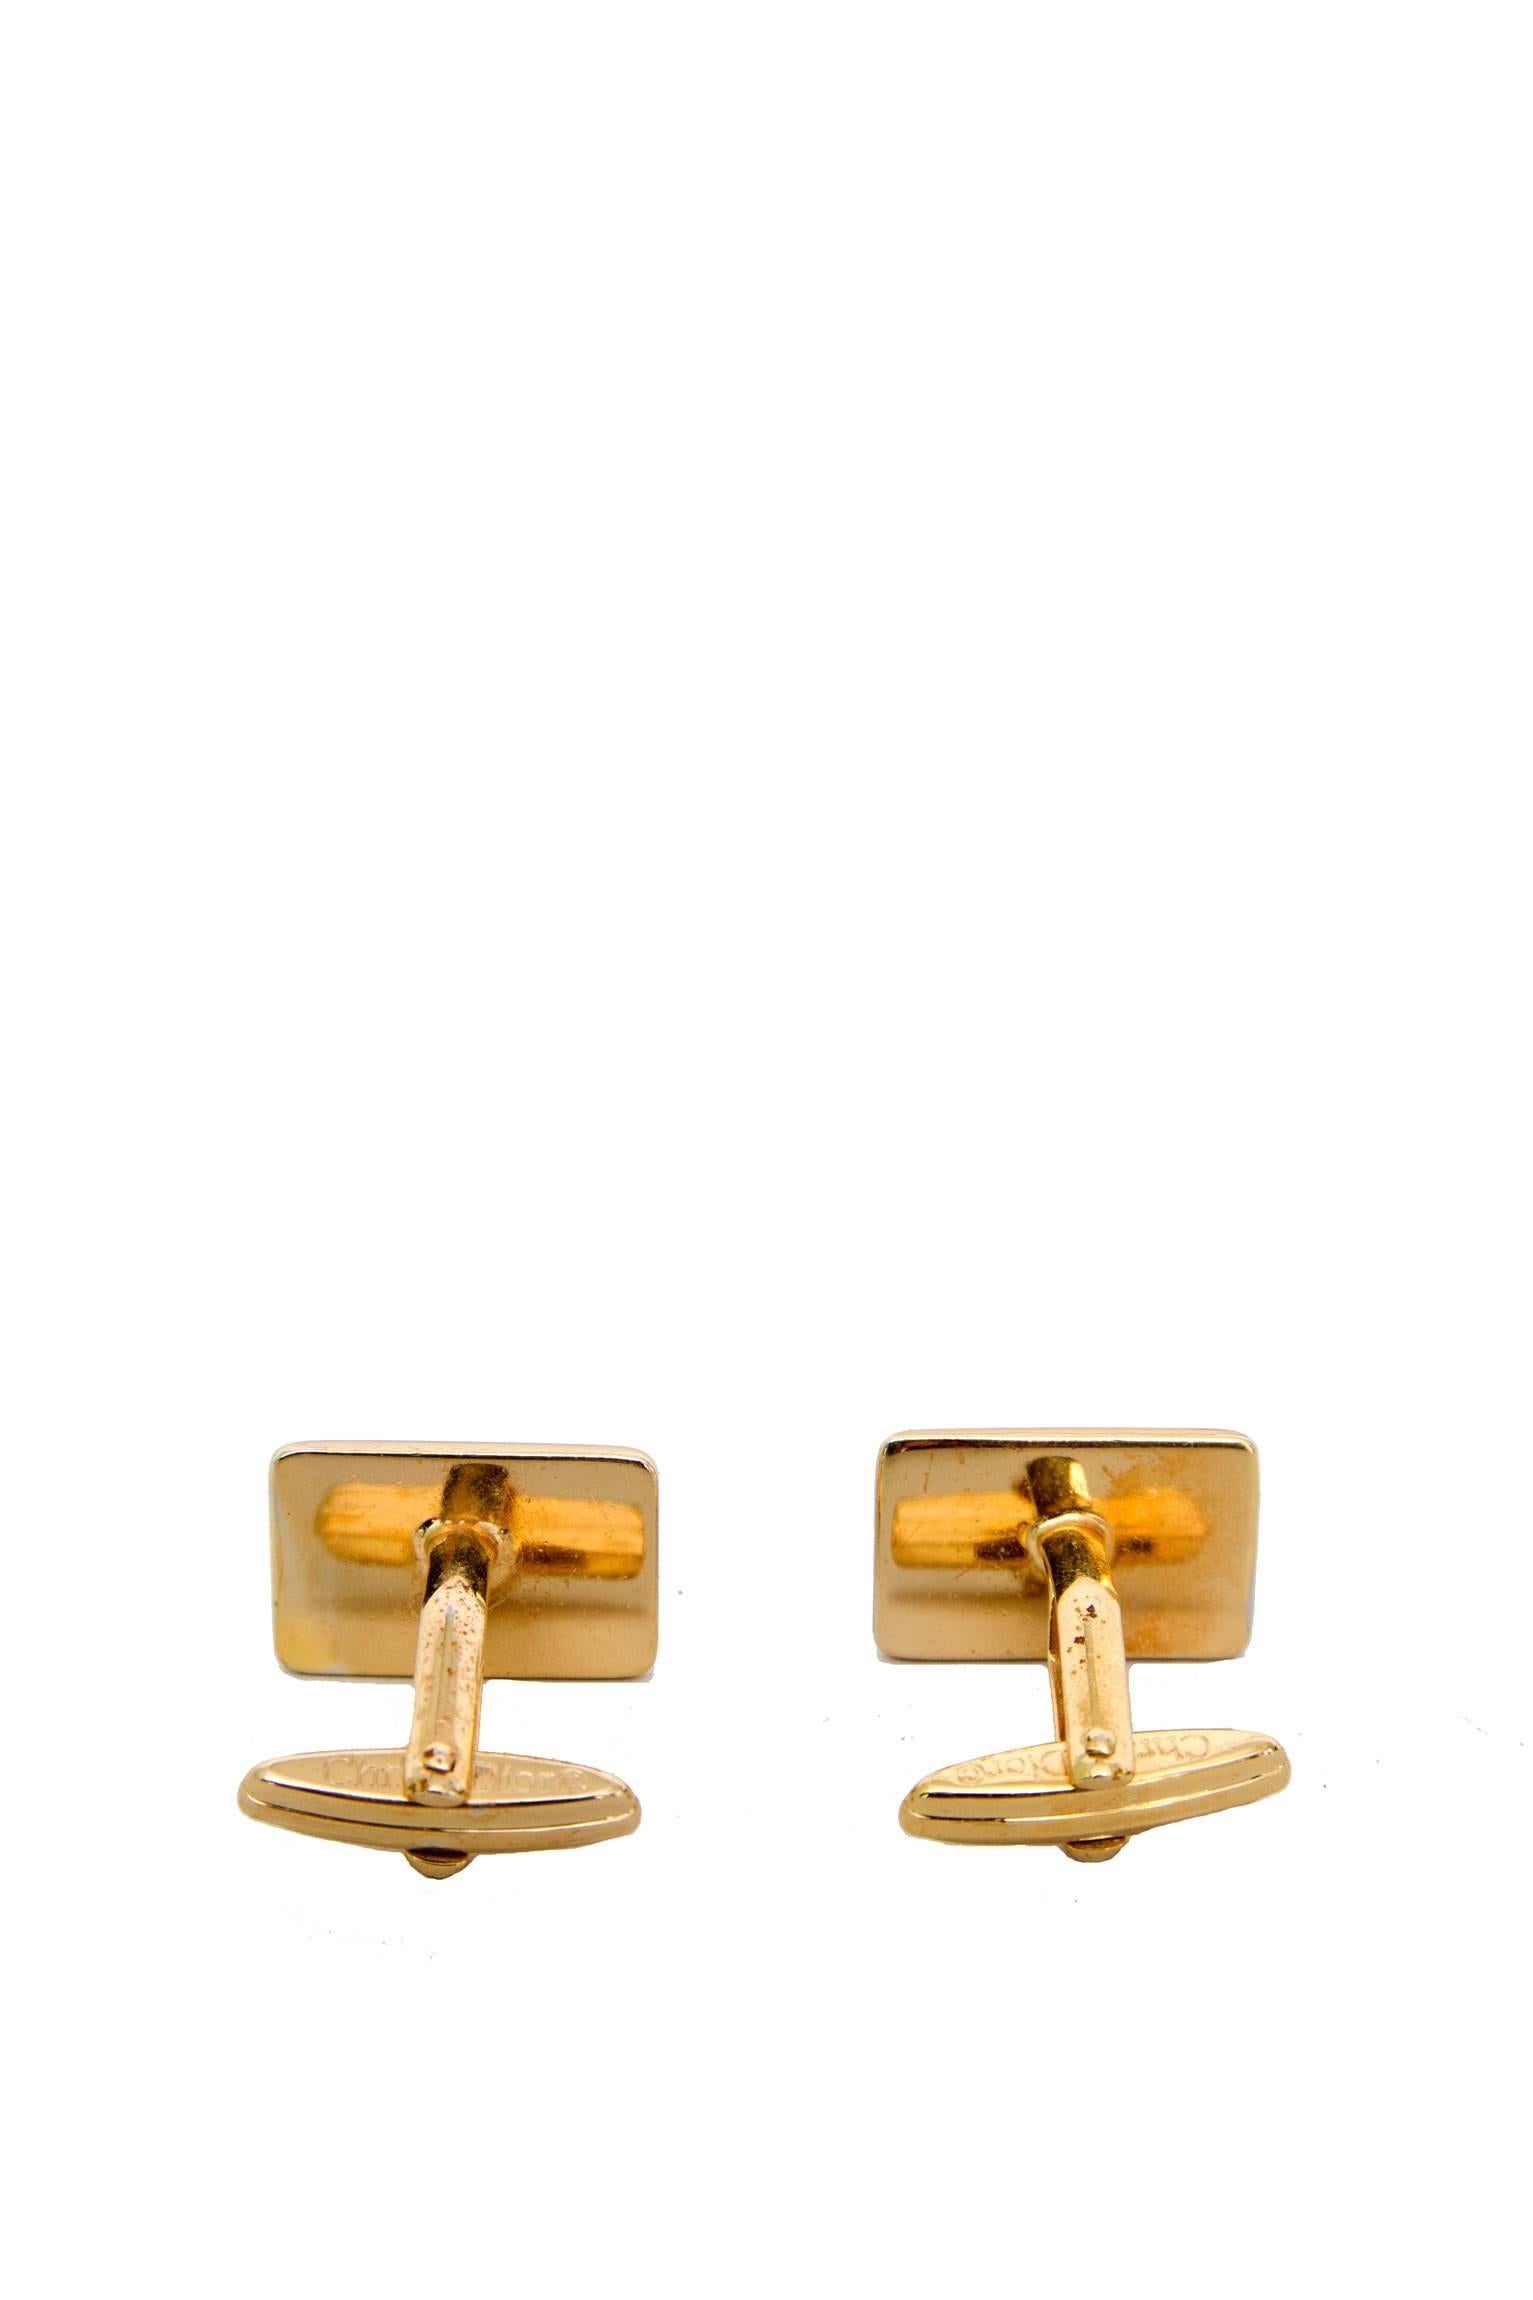 A Pair of 1960s Christian Dior Cufflinks  For Sale 2